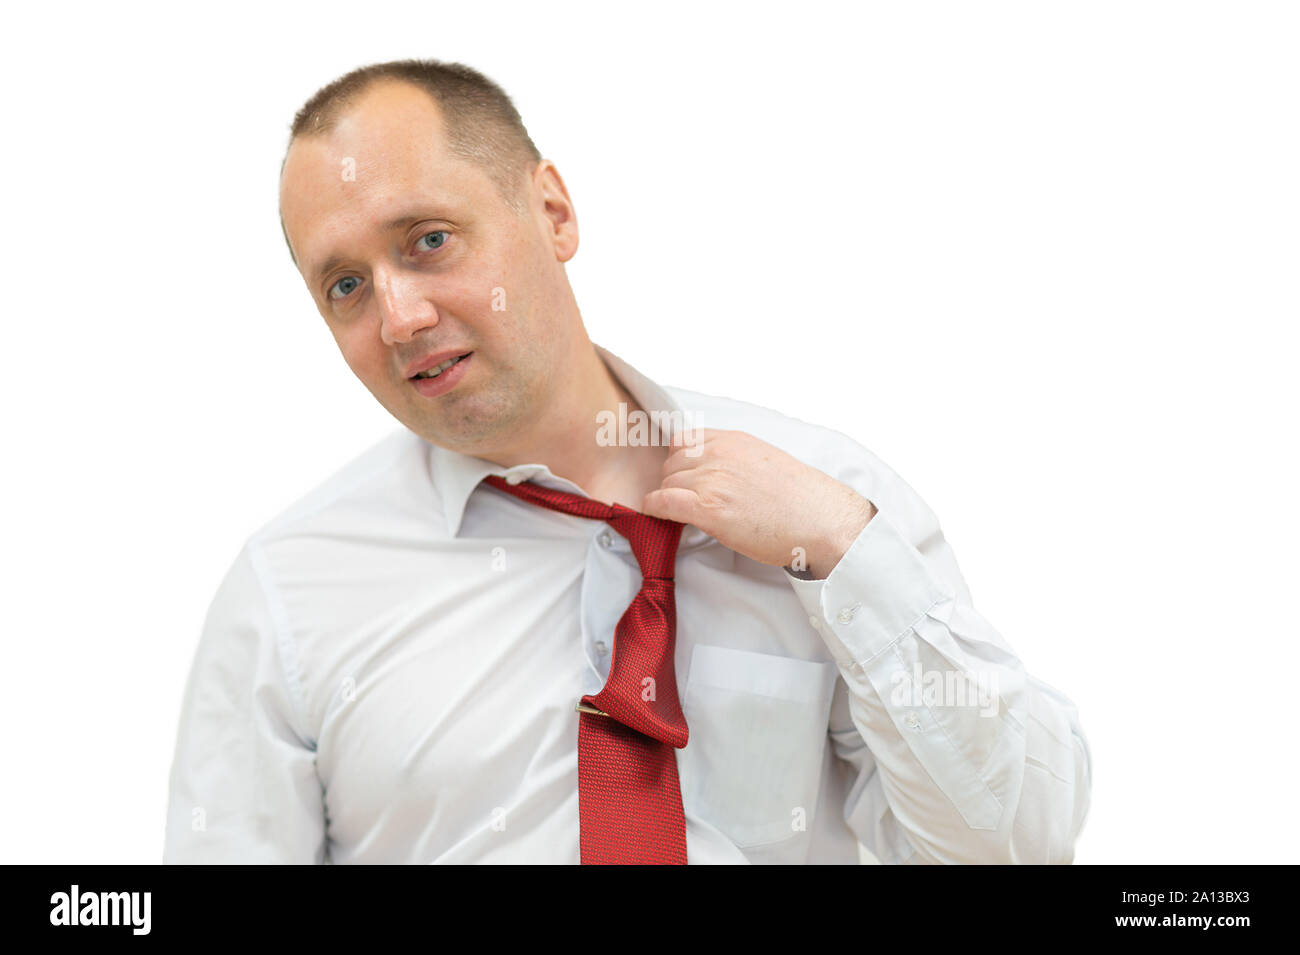 portrait of tired businessman taking off his tie. Isolated on white. man in shirt taking off his red necktie while standing against white background. Stock Photo